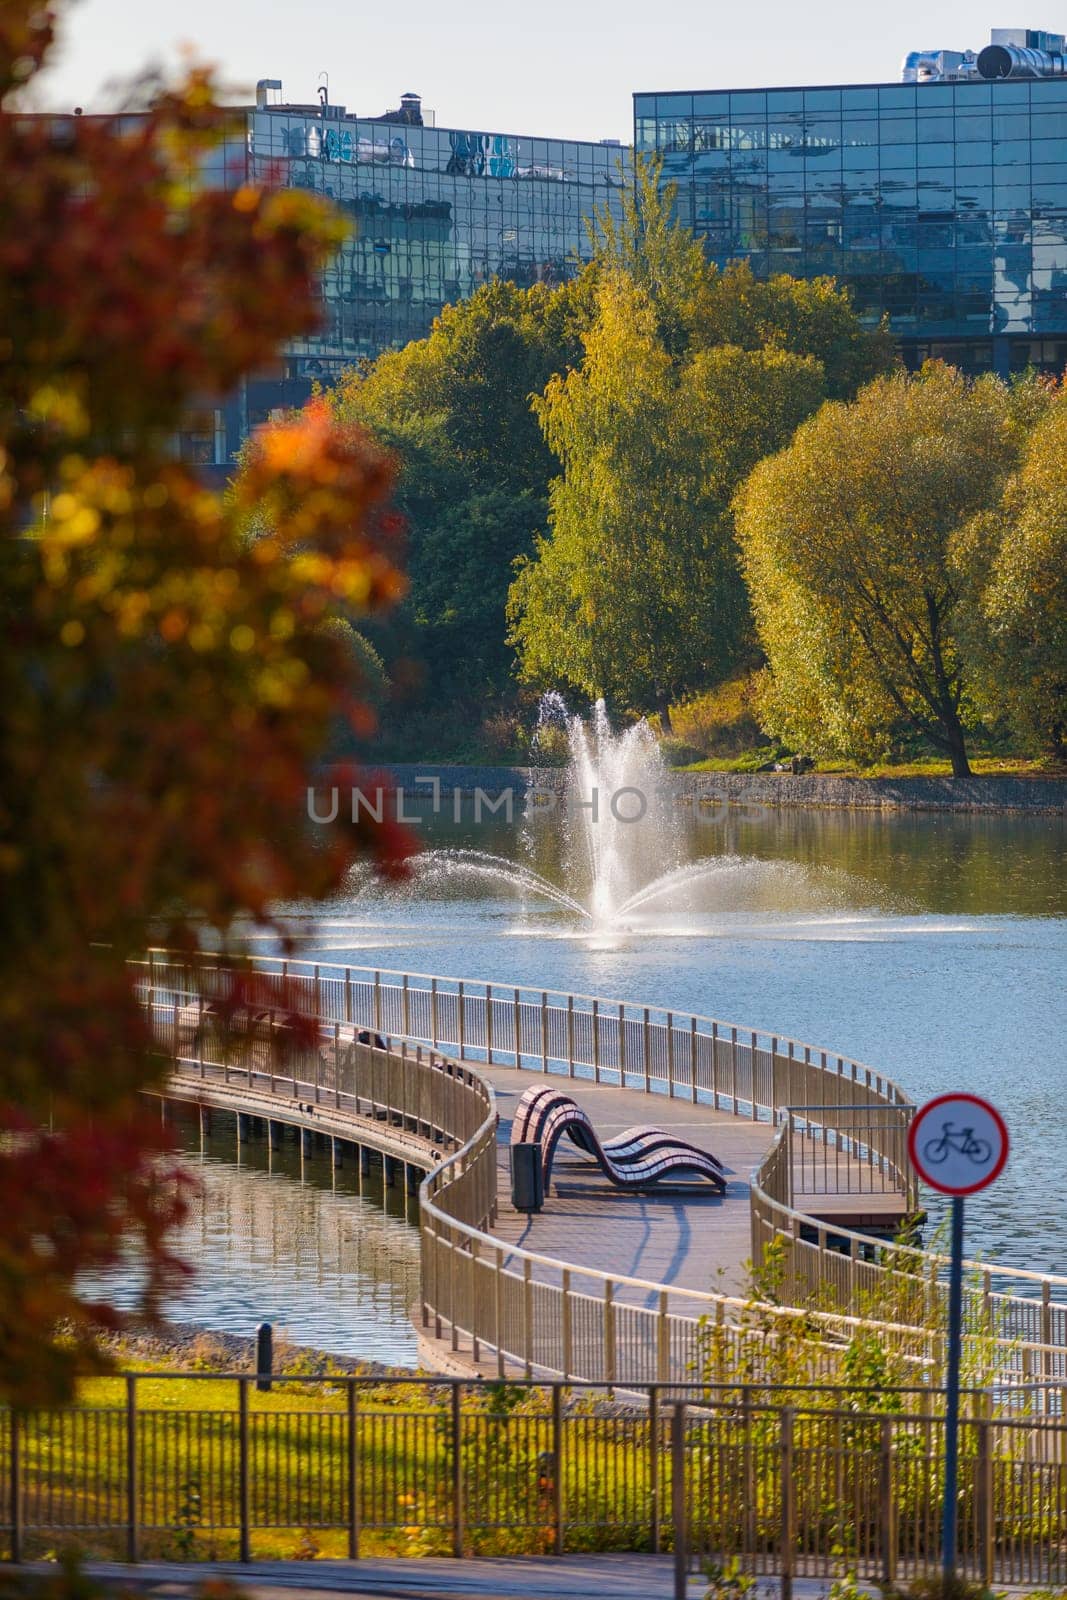 A fountain on a pond in an autumn park creates a magical atmosphere of tranquility by Yurich32